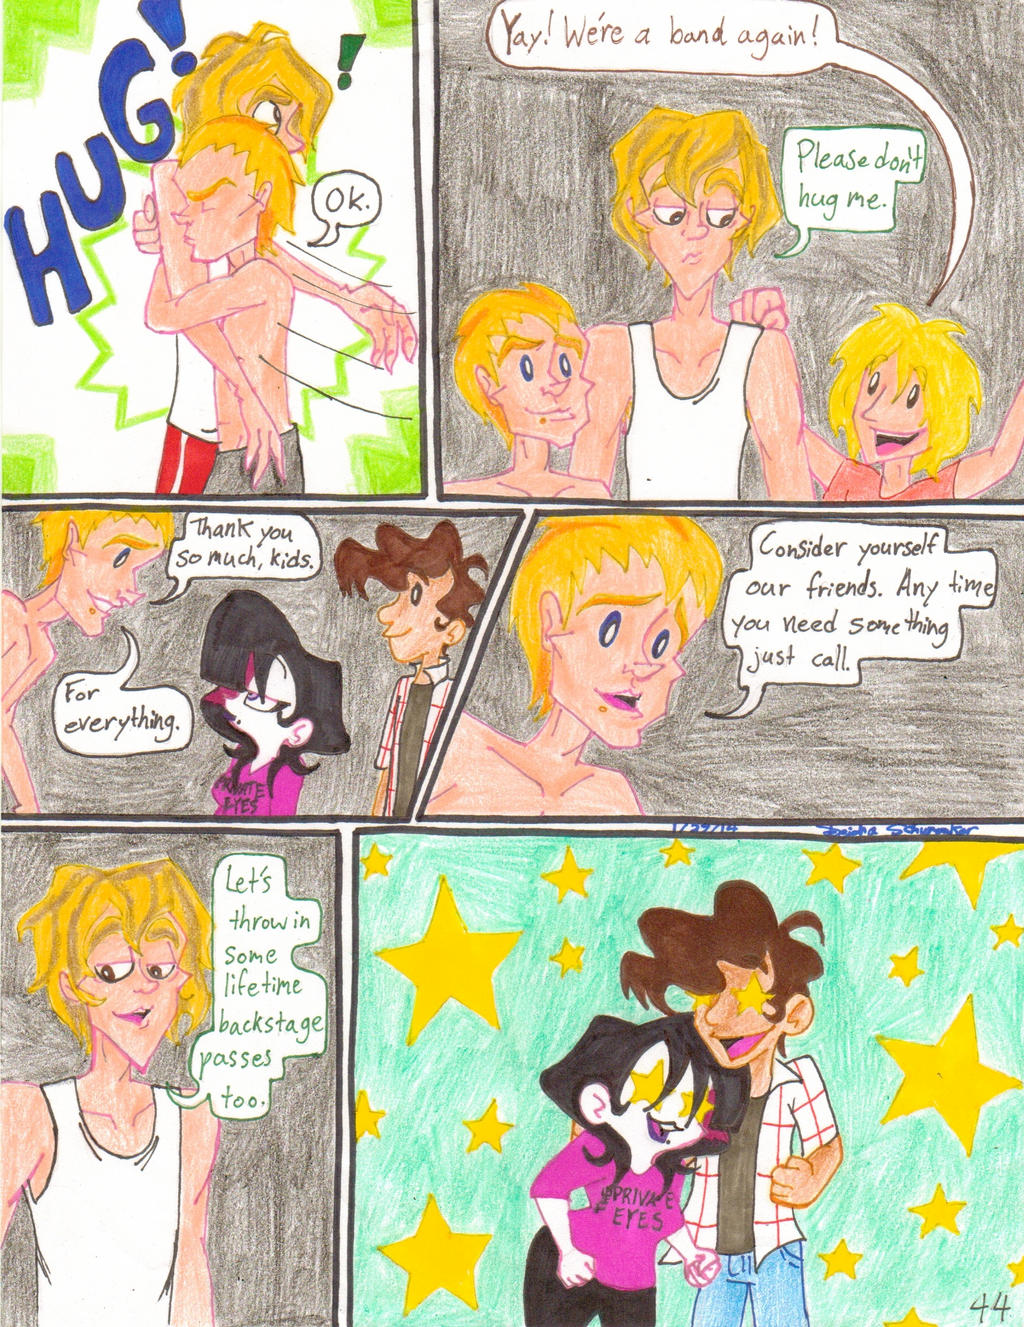 Rocky and Plum Rock the New year pg. 44